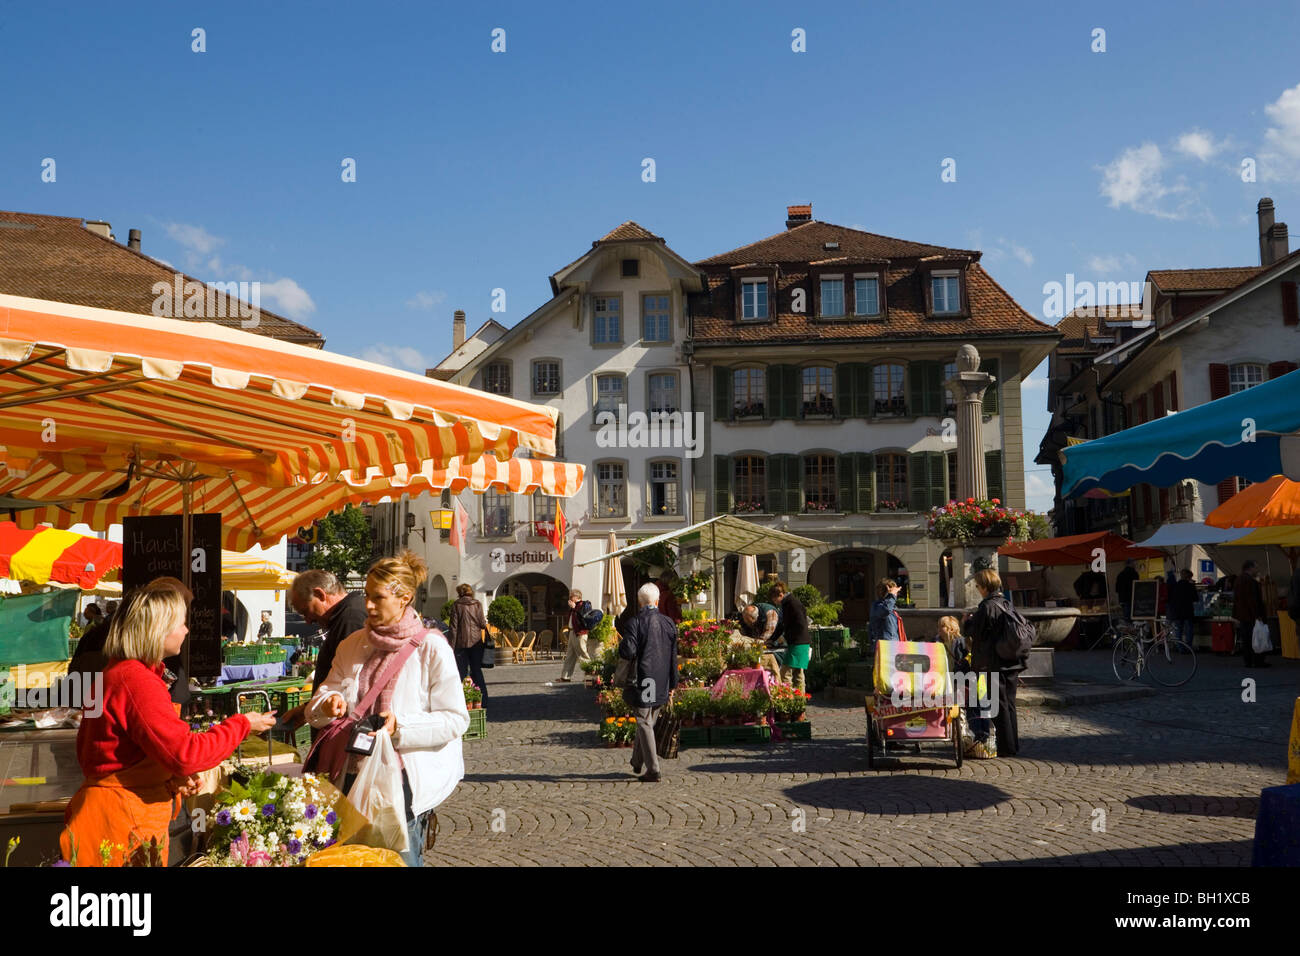 Saturday's Market in town hall square, Thun (largest garrison town of Switzerland), Bernese Oberland (highlands), Canton of Bern Stock Photo